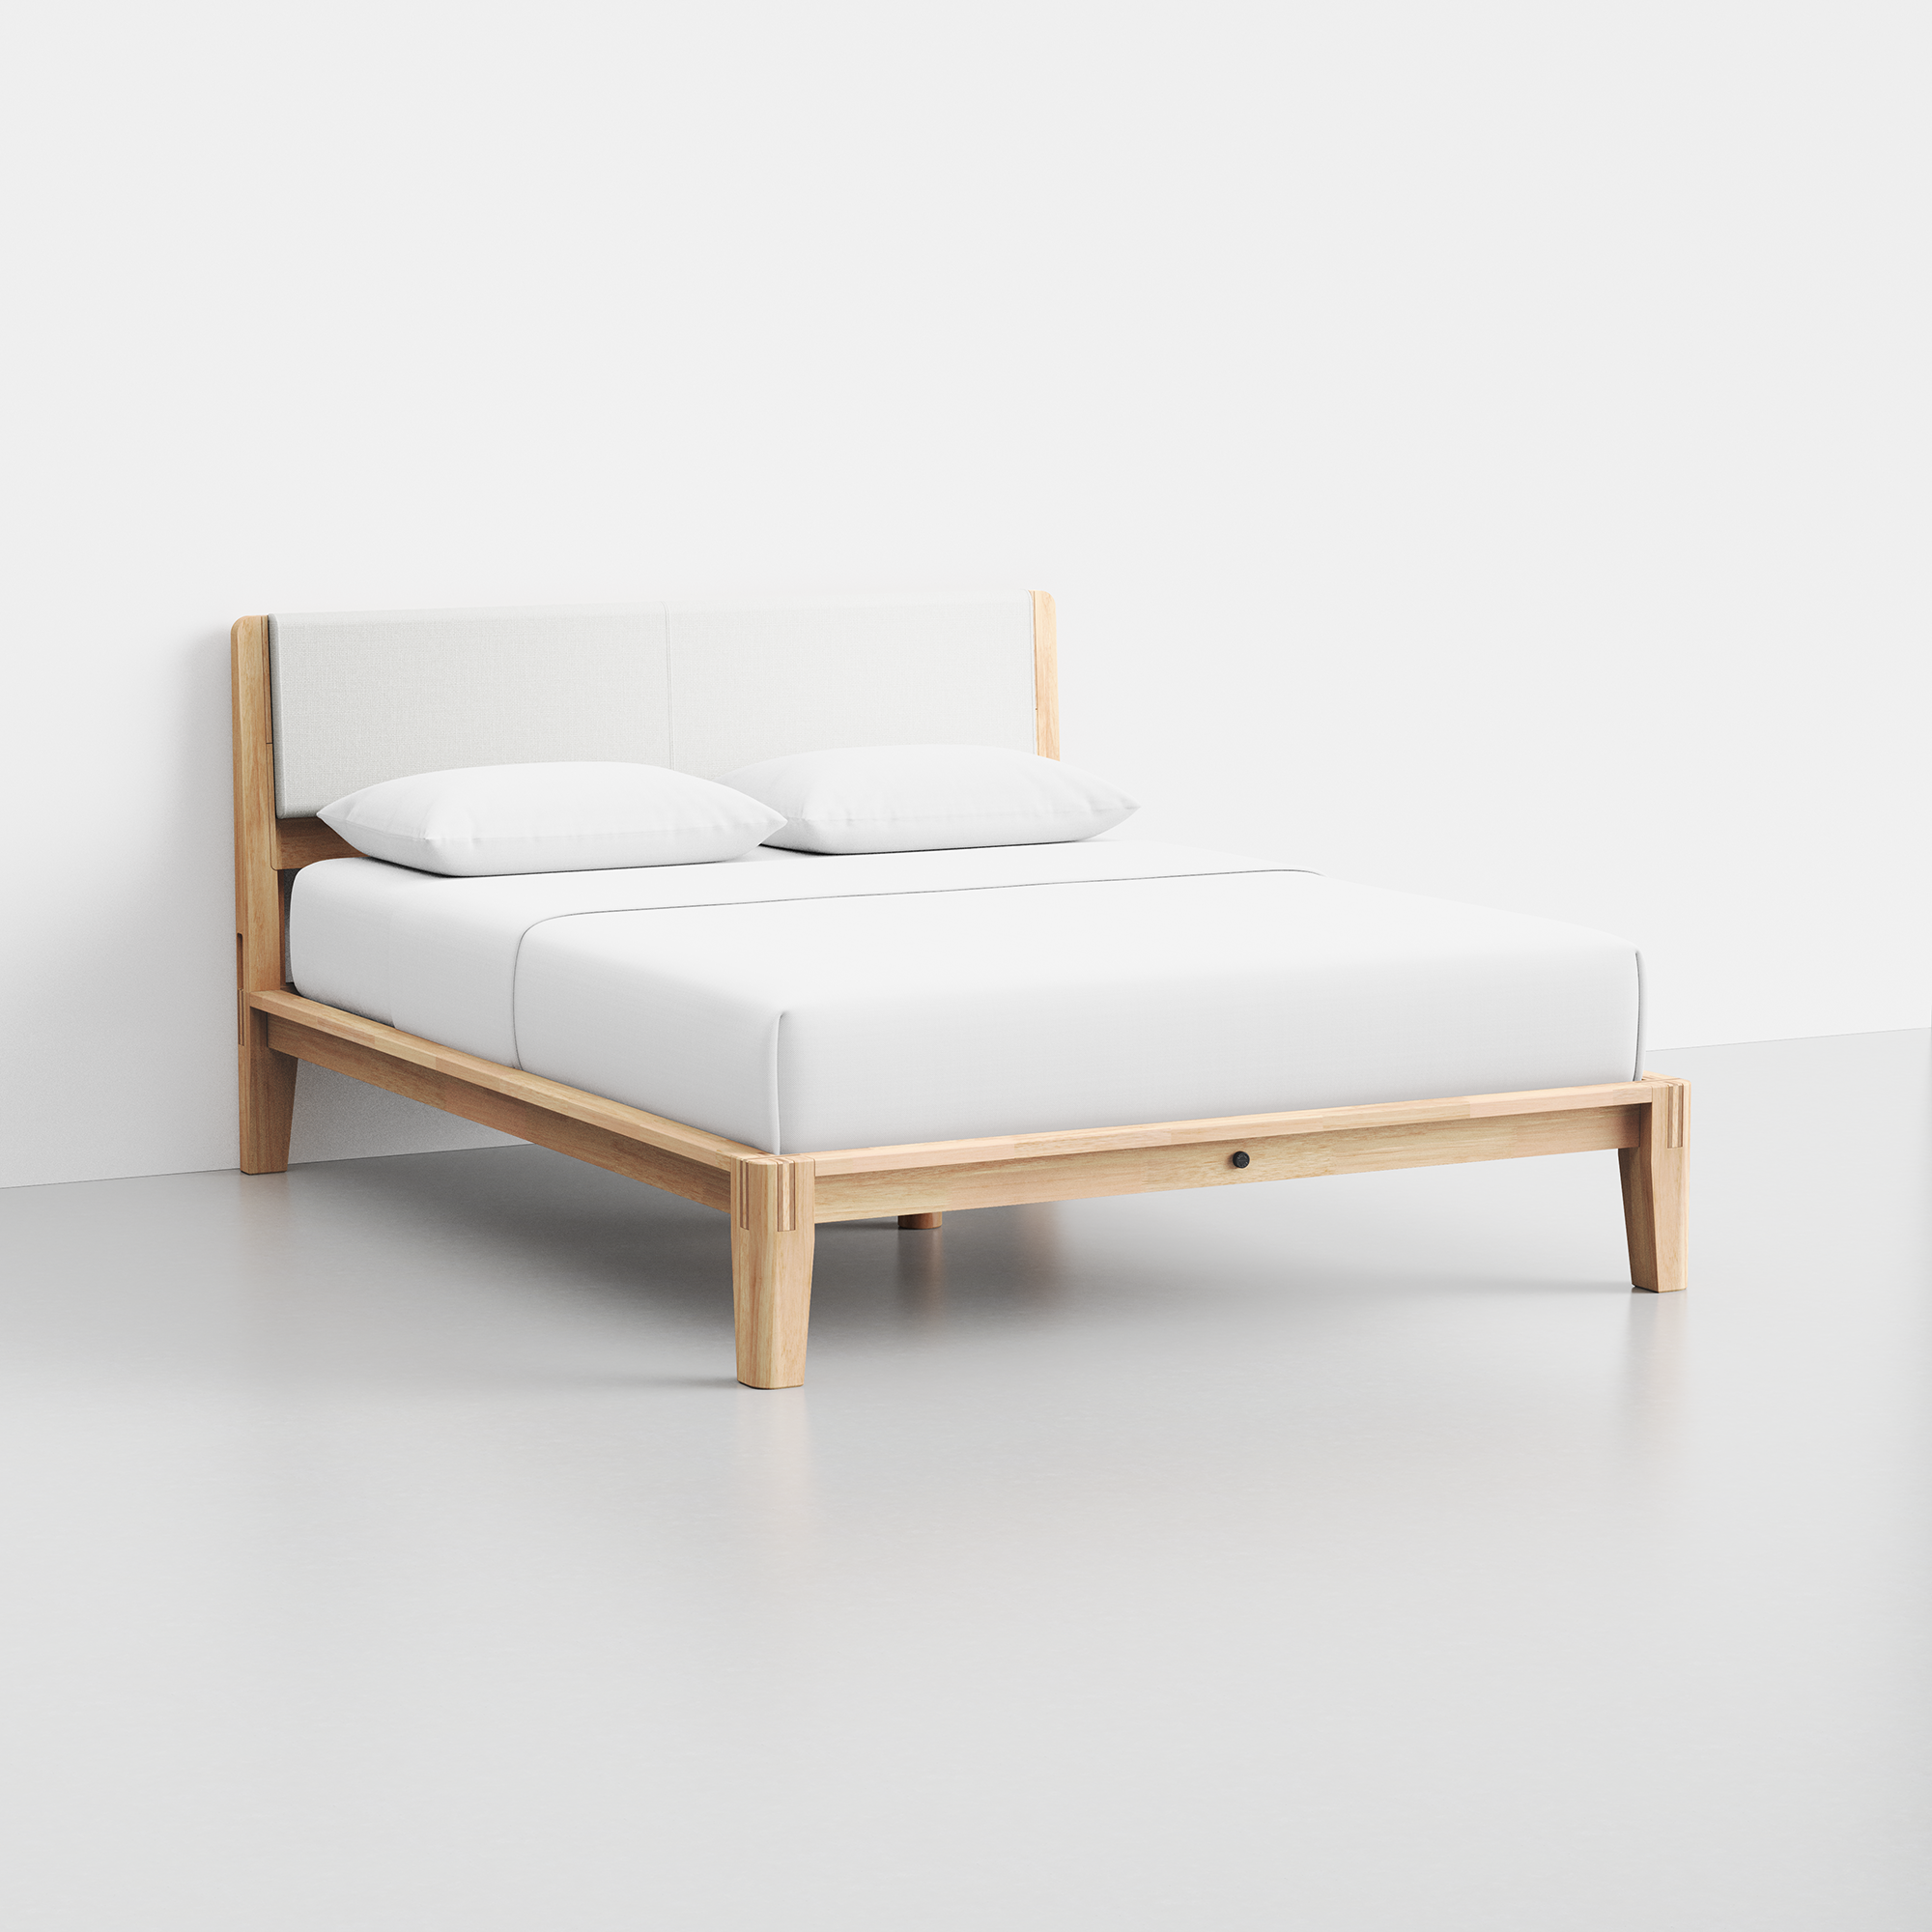 The Bed (Natural / HB Cushion Light Linen) - Render - Angled